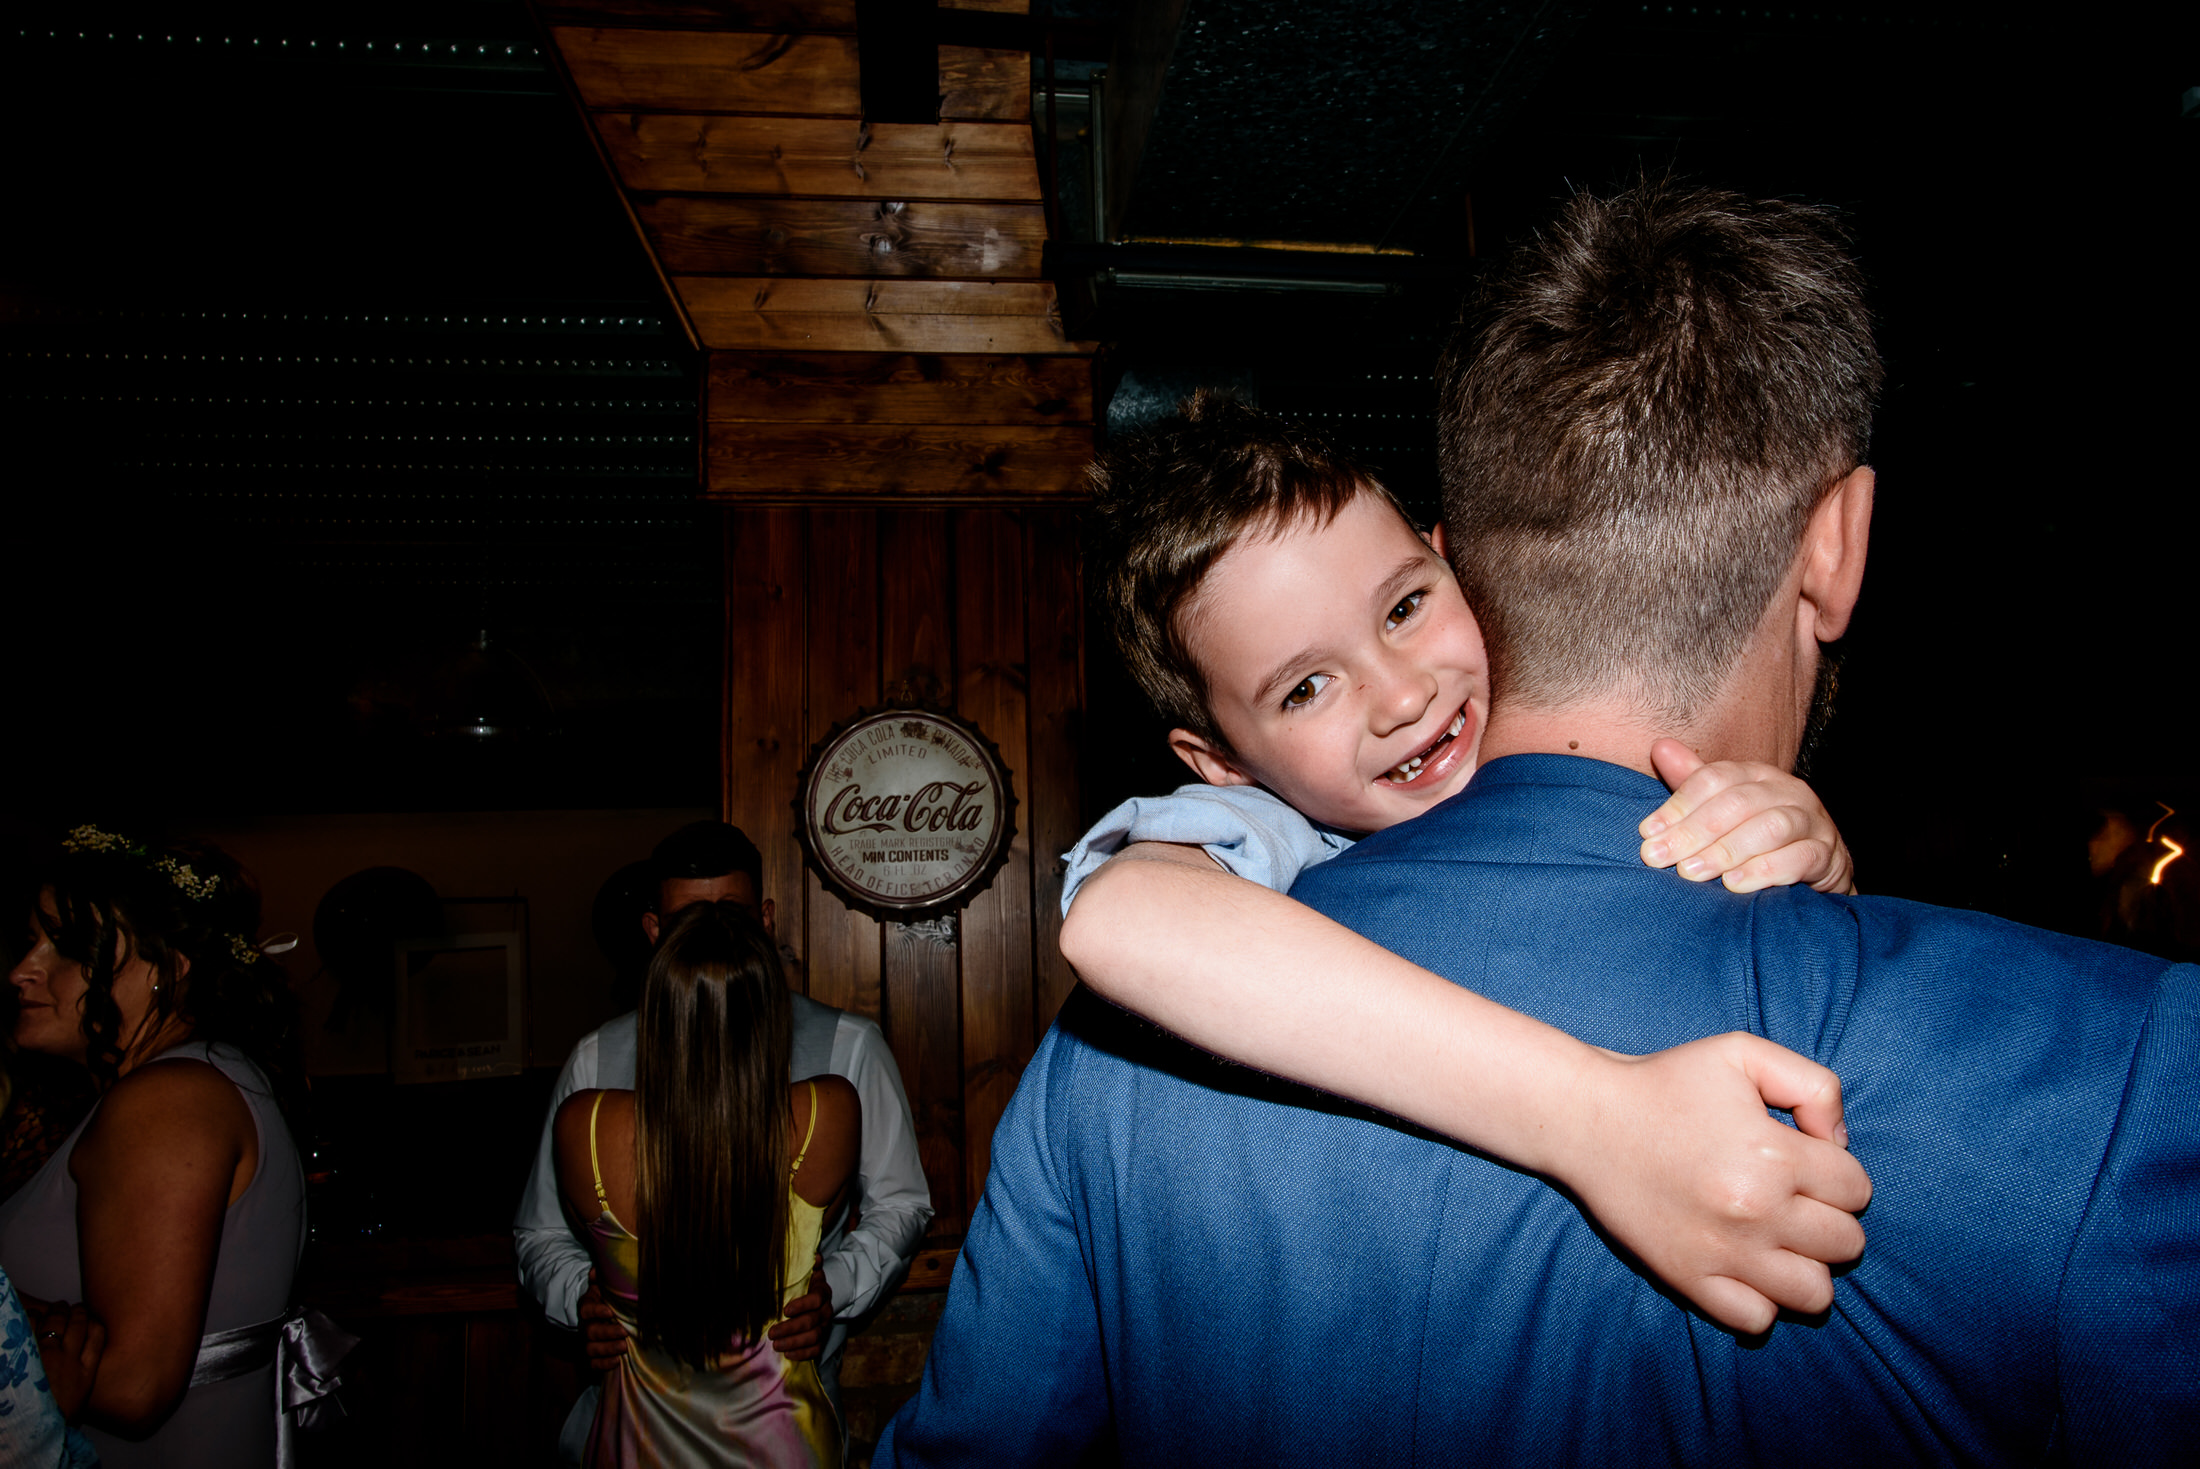 A man hugging a young boy at a wedding party.